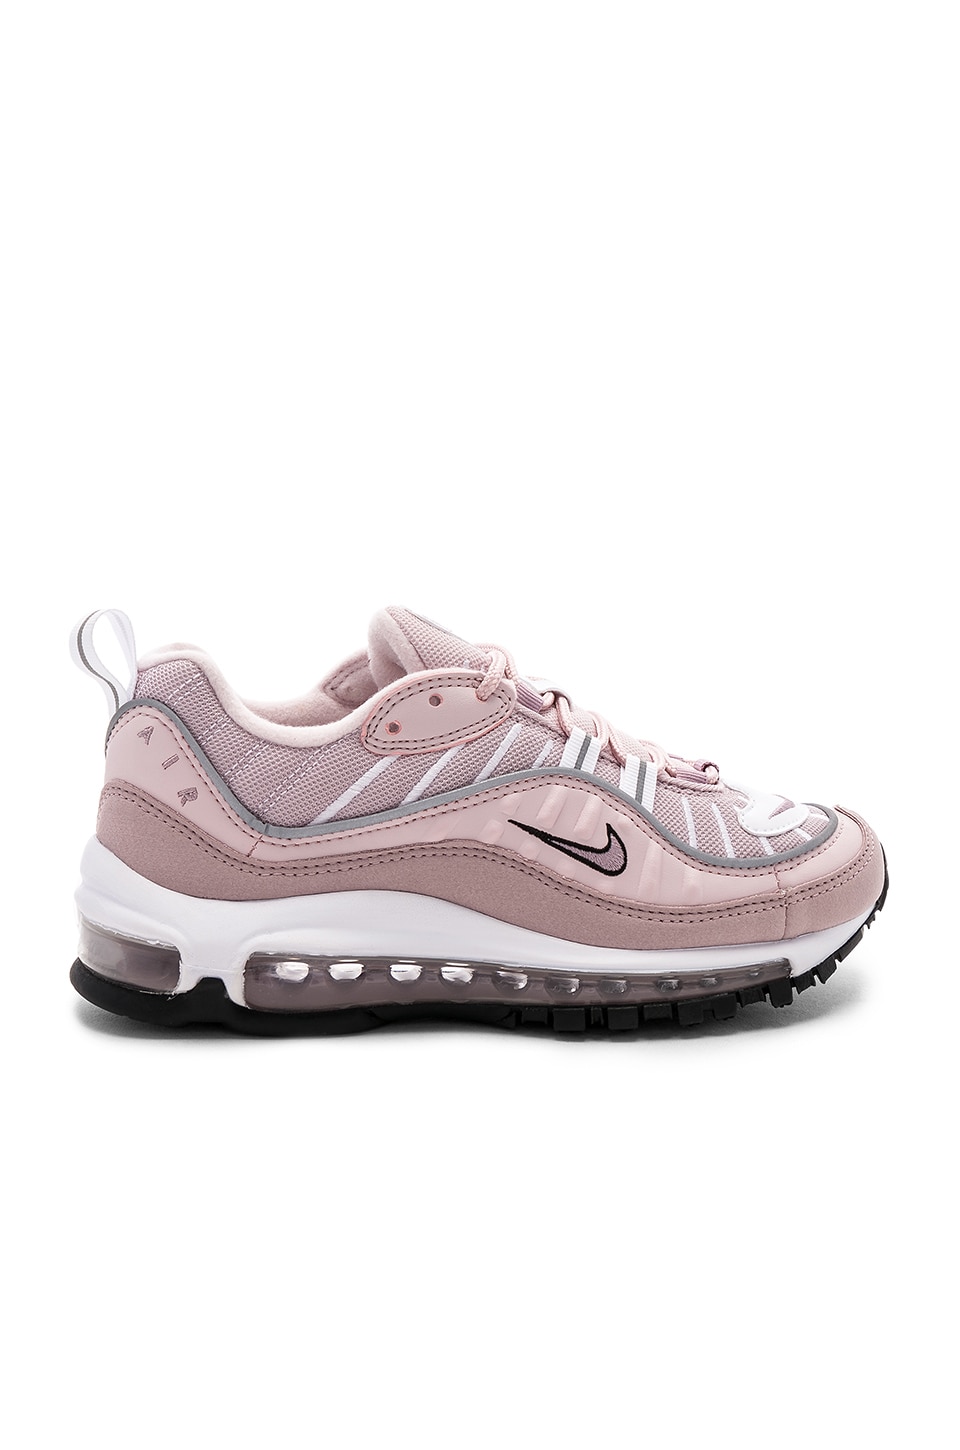 nike air max 98 leather and nubuck-trimmed mesh sneakers